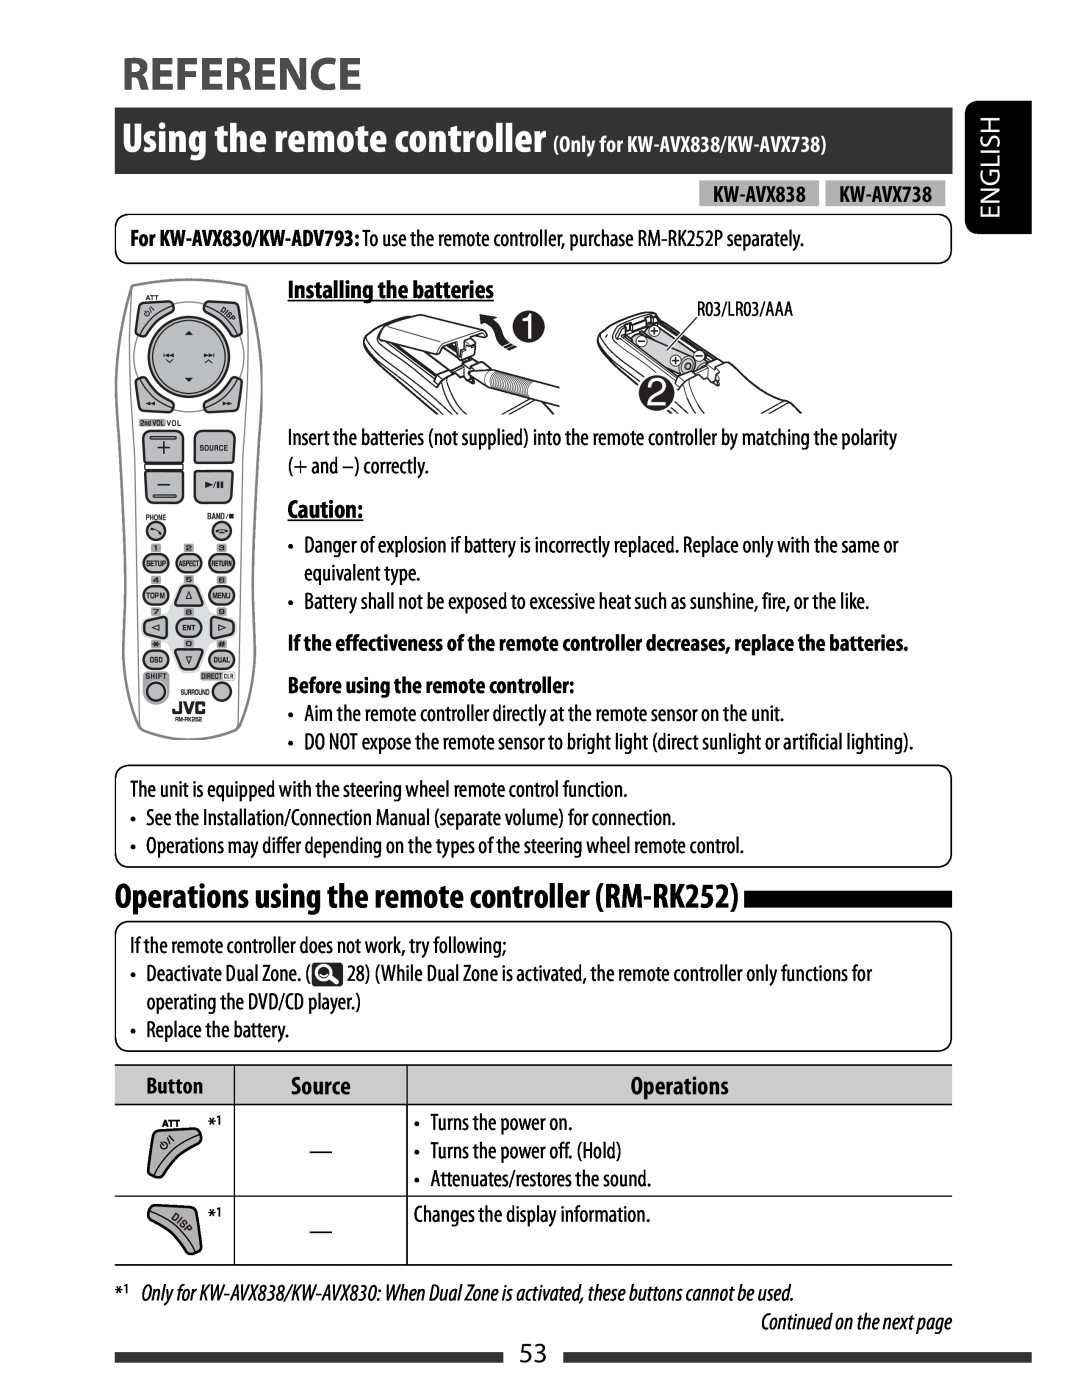 JVC KW-AVX830 manual Reference, Operations using the remote controller RM-RK252, English, Installing the batteries, Source 